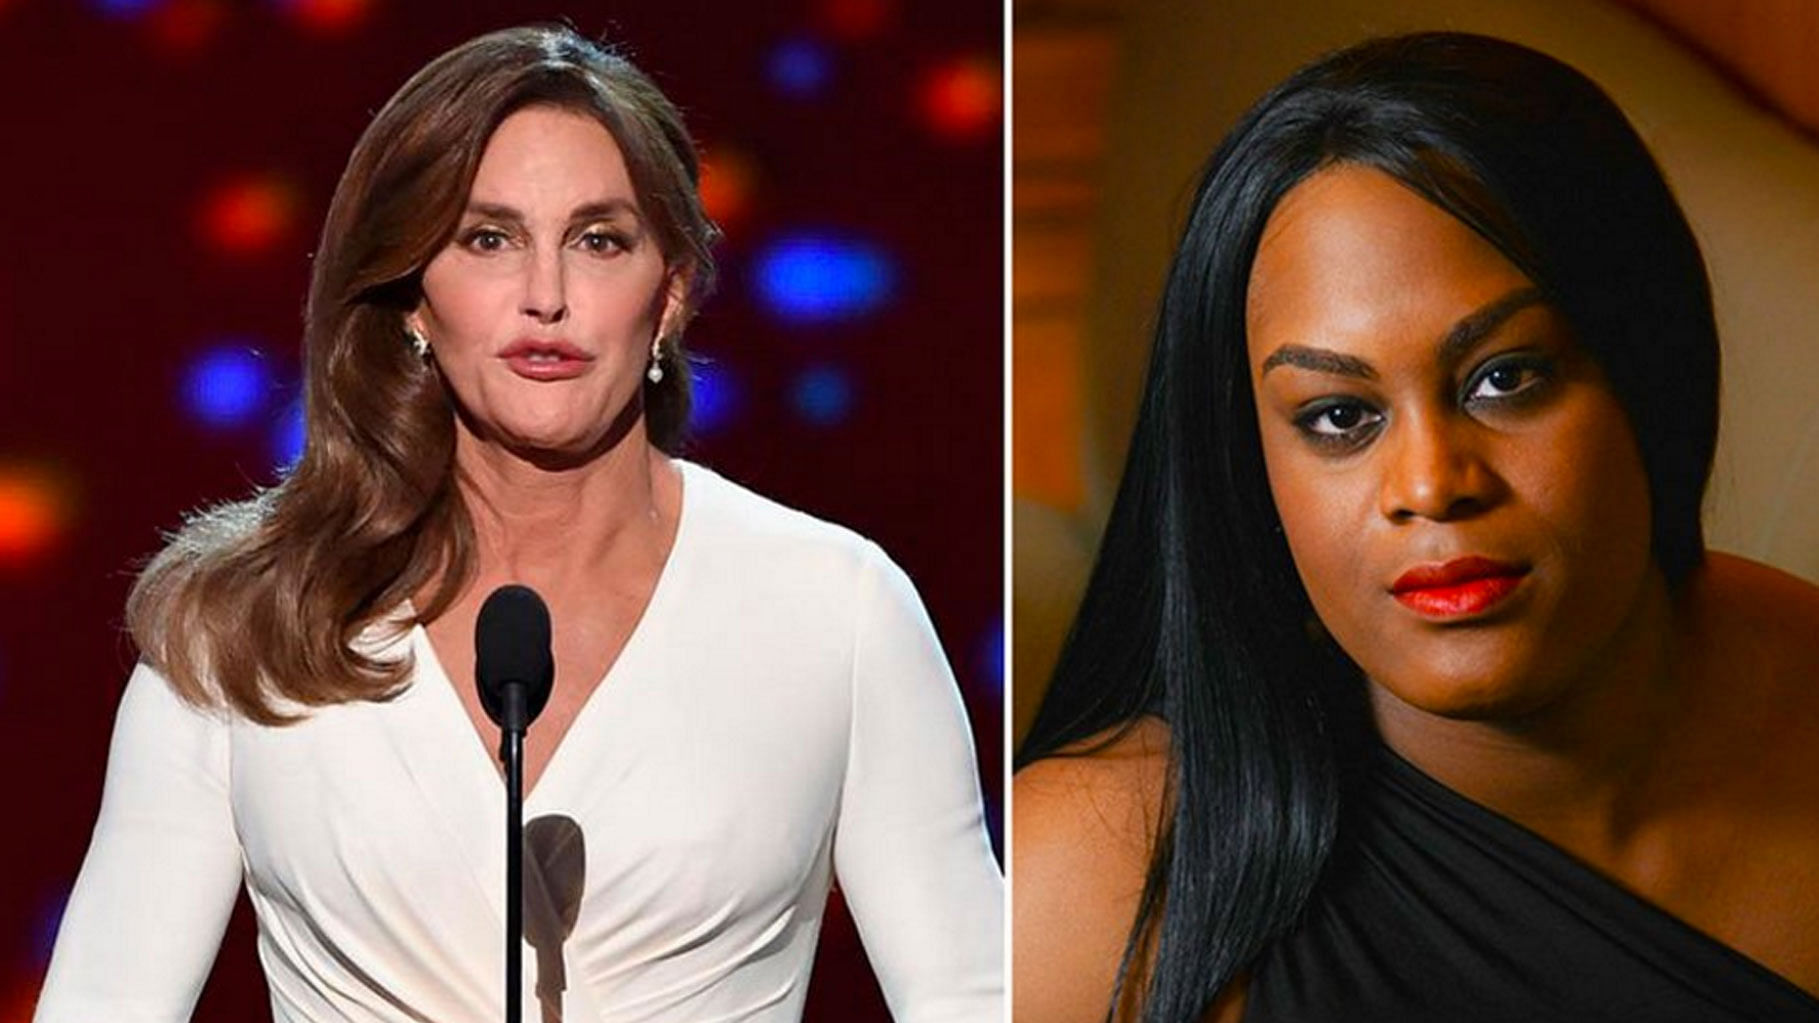 Caitlyn Jenner will be vouching strongly for Mya Taylor at the 88th Academy Awards, for her performance in <i>Tangerine</i> (Photo: Twitter/<a href="https://twitter.com/papelpop">@papelpop</a>)